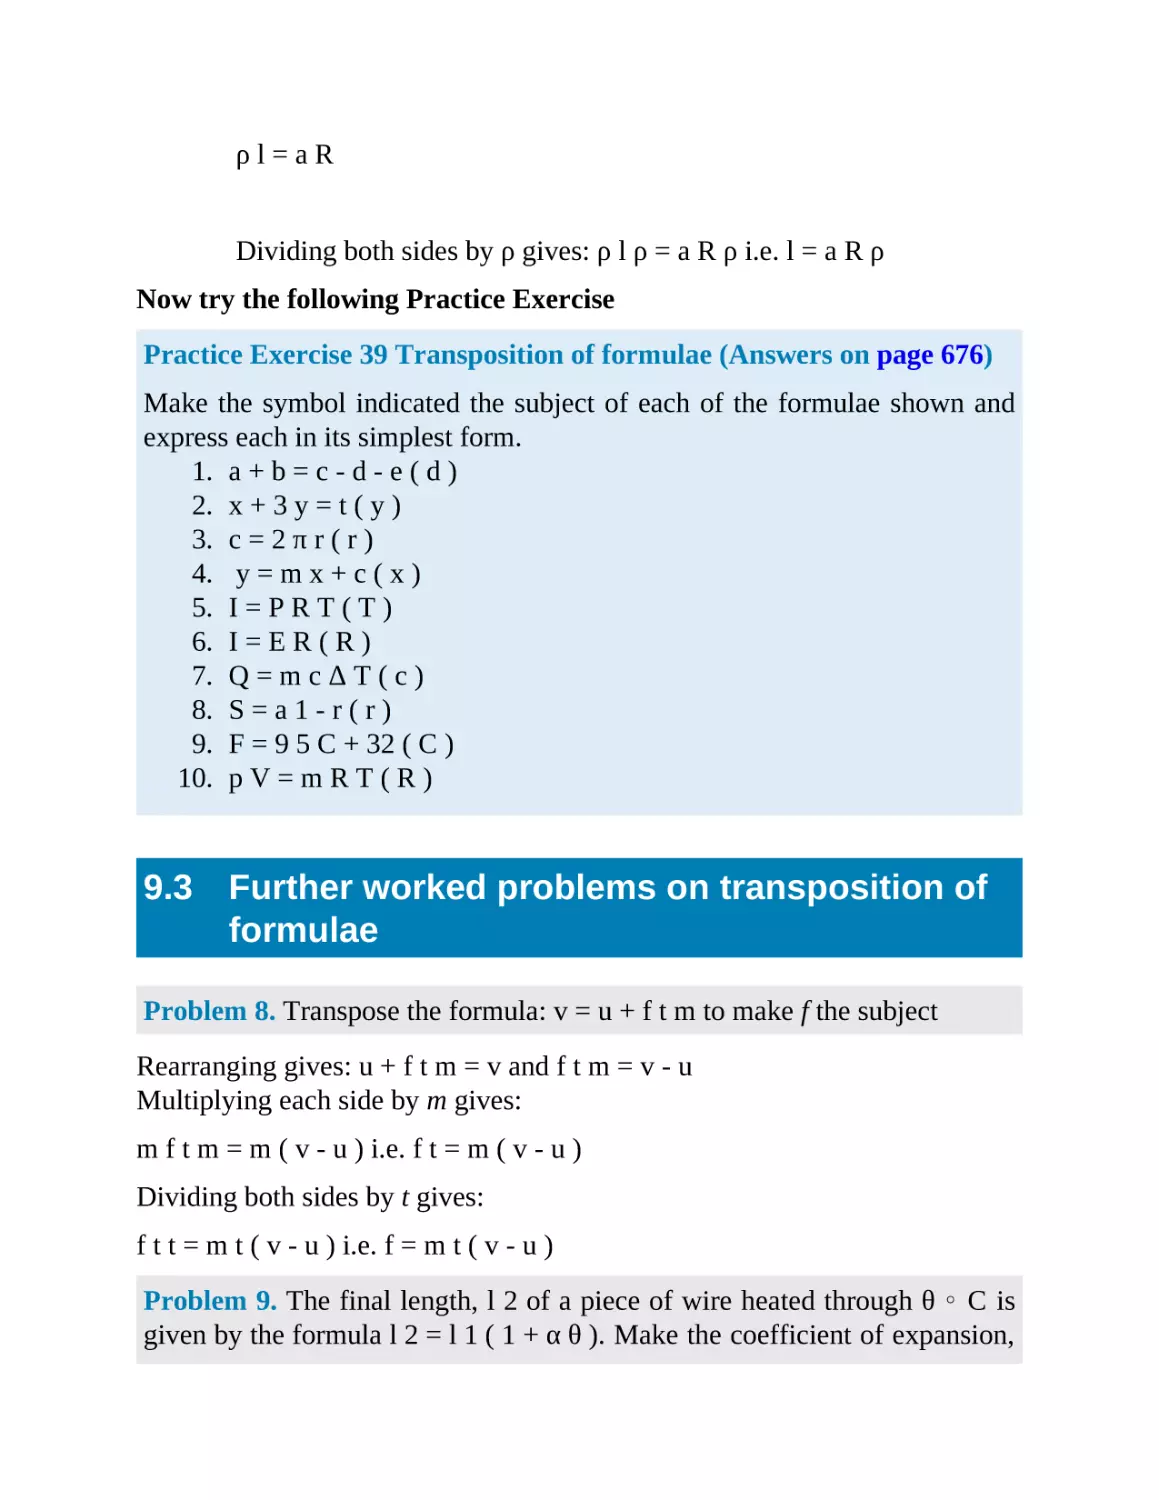 9.3 Further worked problems on transposition of formulae